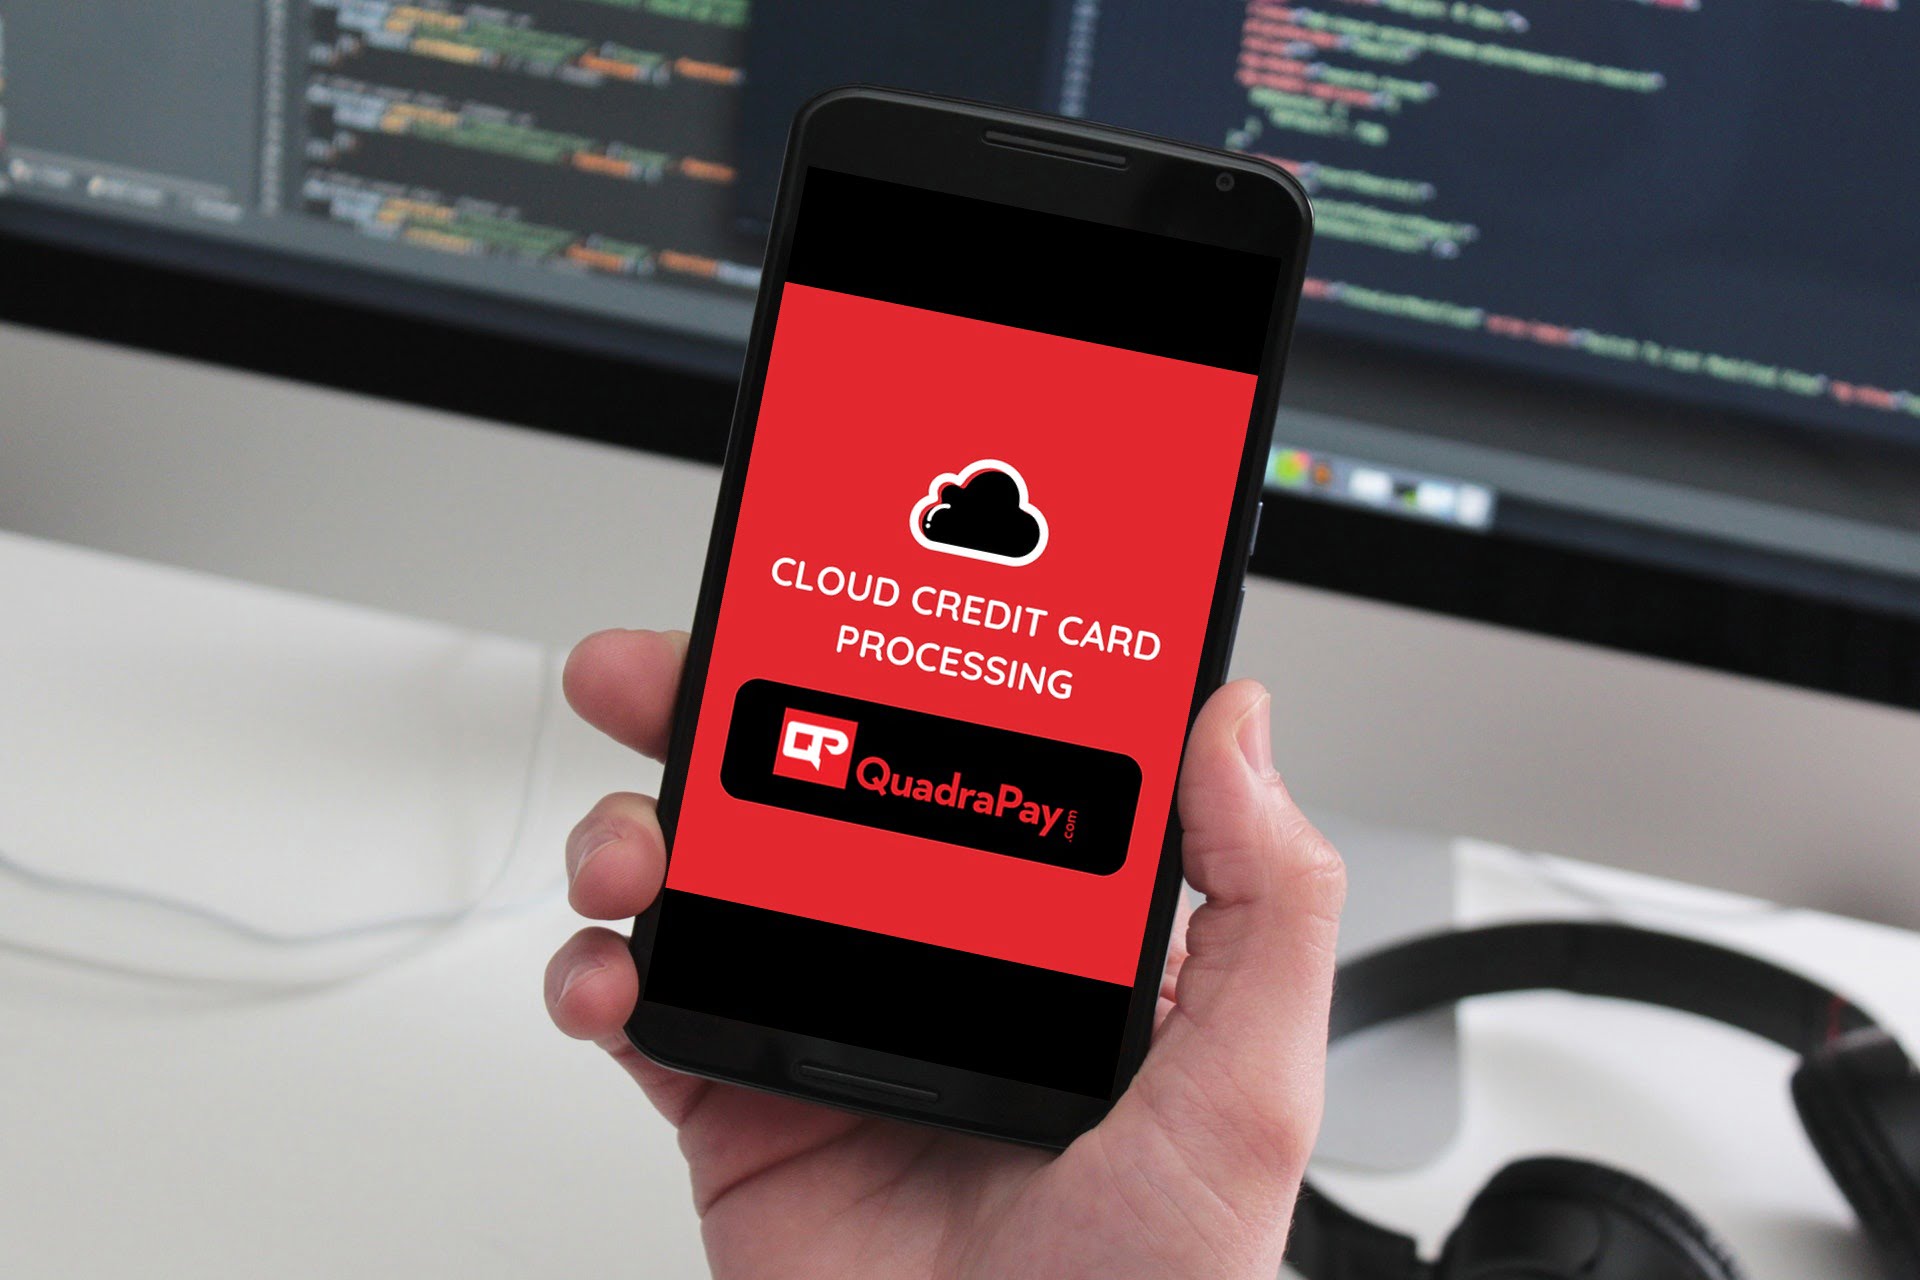 cloud credit card processing from Quadrapay